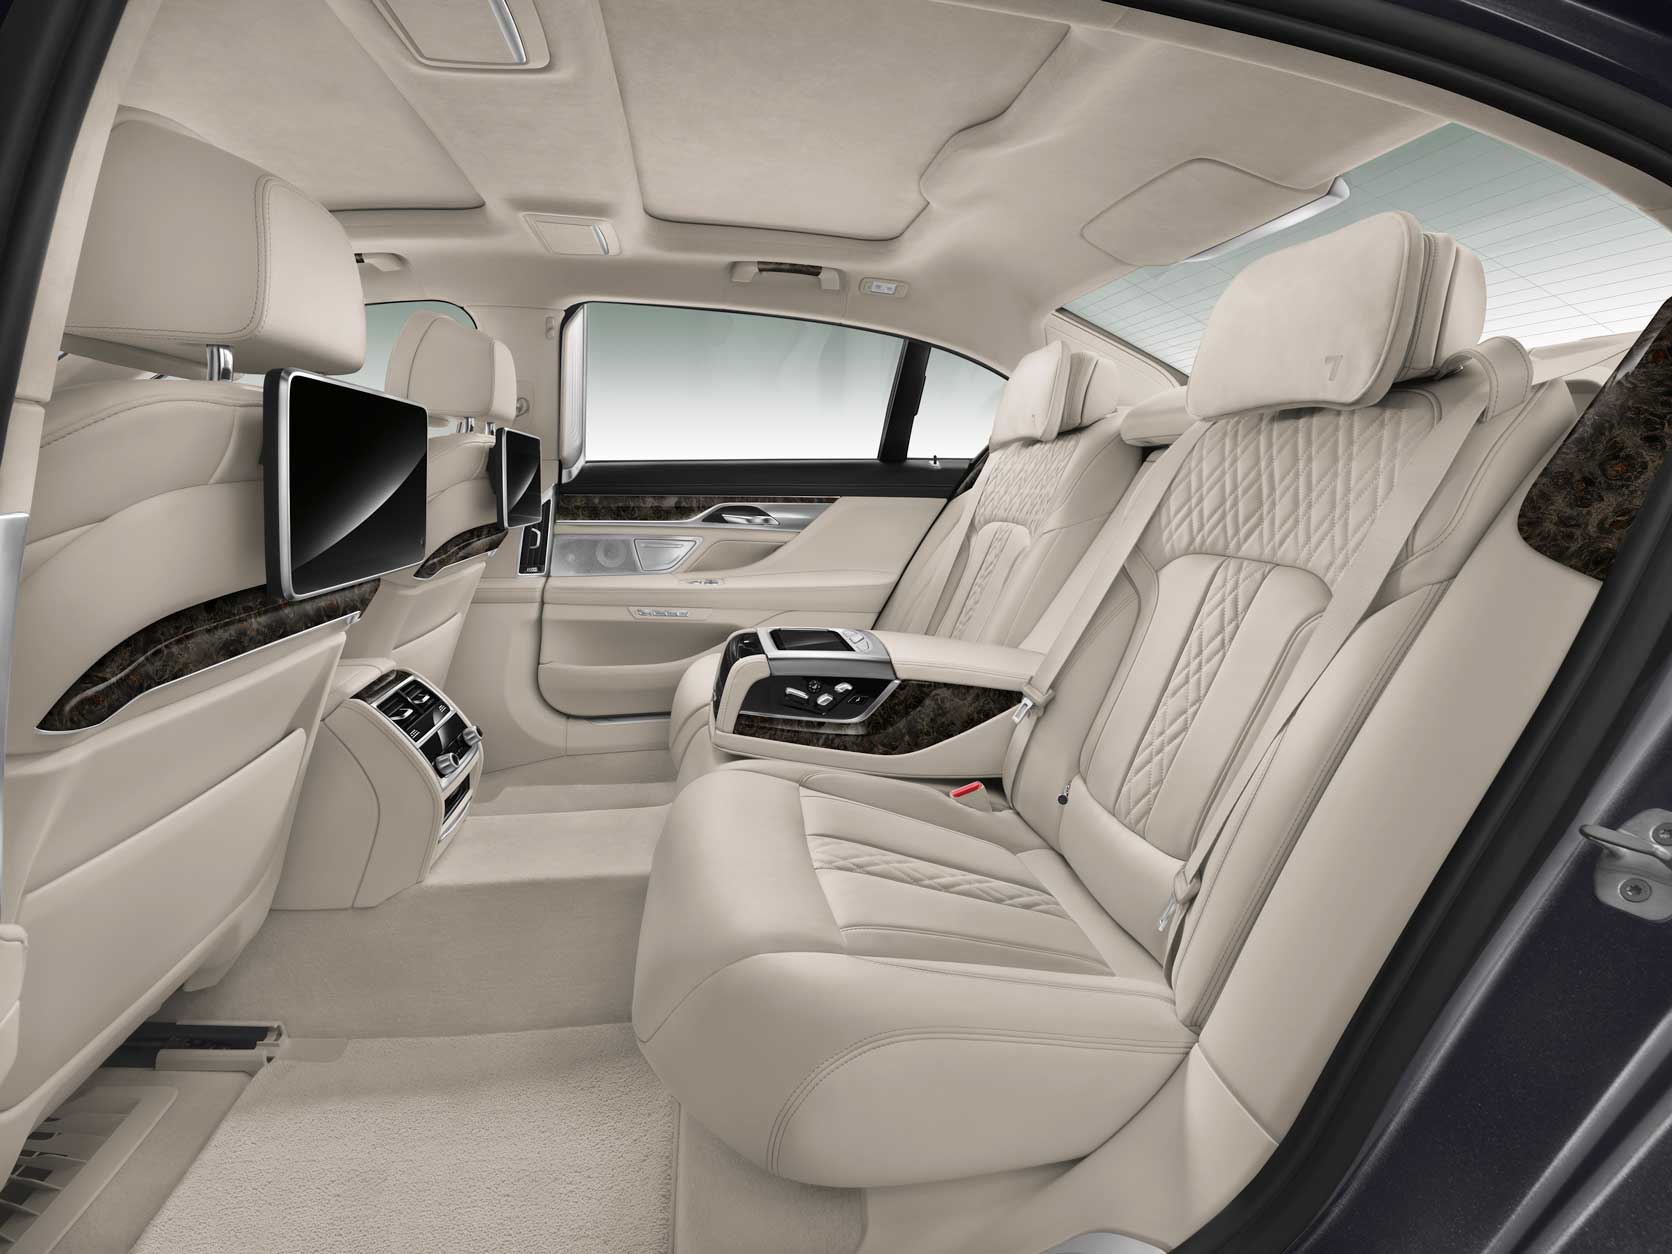 The 2016 Bmw 7 Series Is A Private Jet On Wheels Sharp